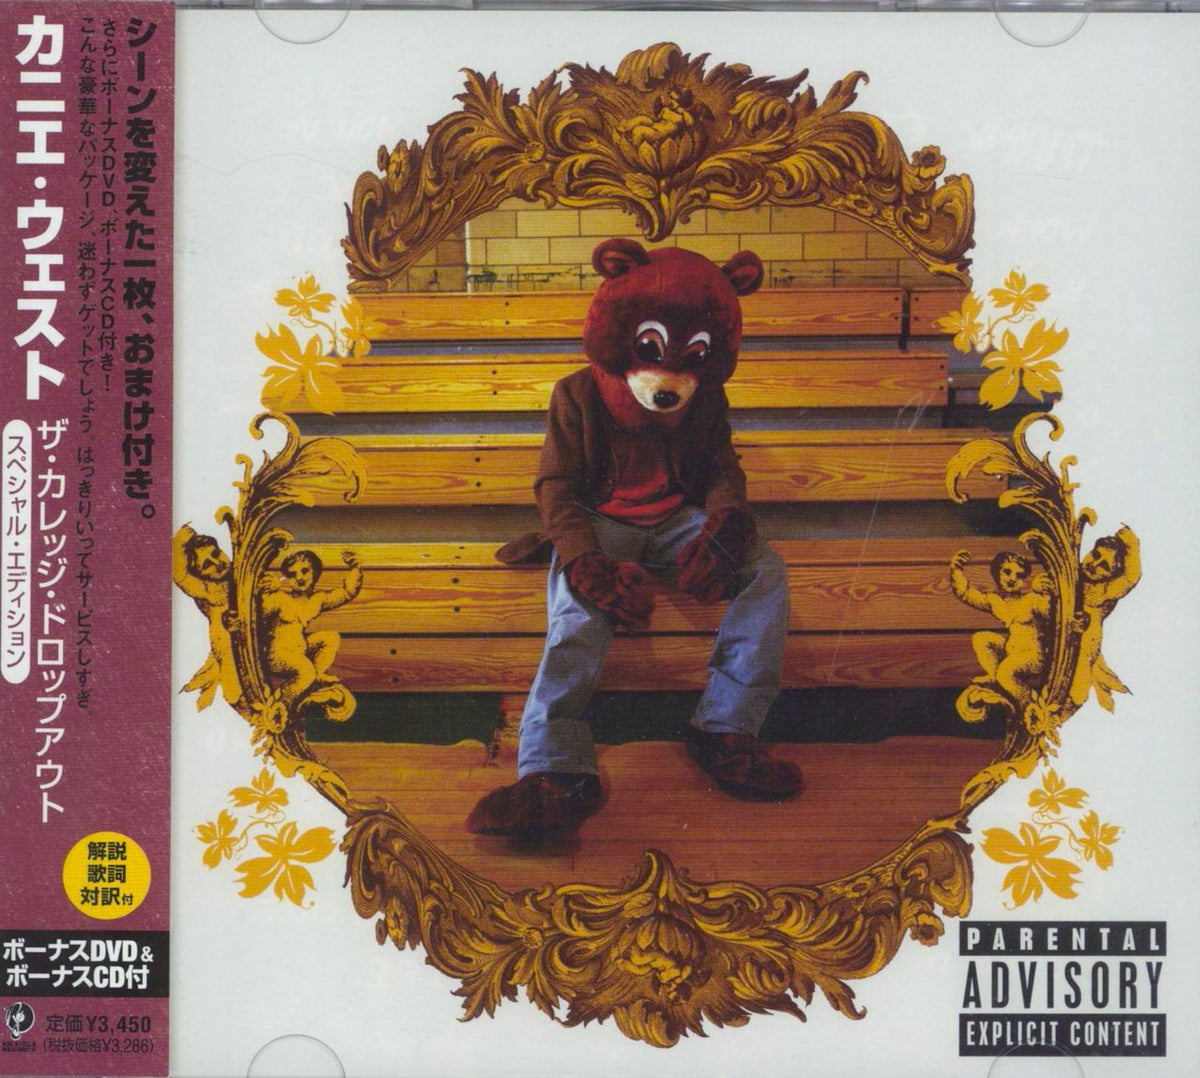 Kanye West The College Dropout: Special Edition Japanese 3-disc CD/DVD Set